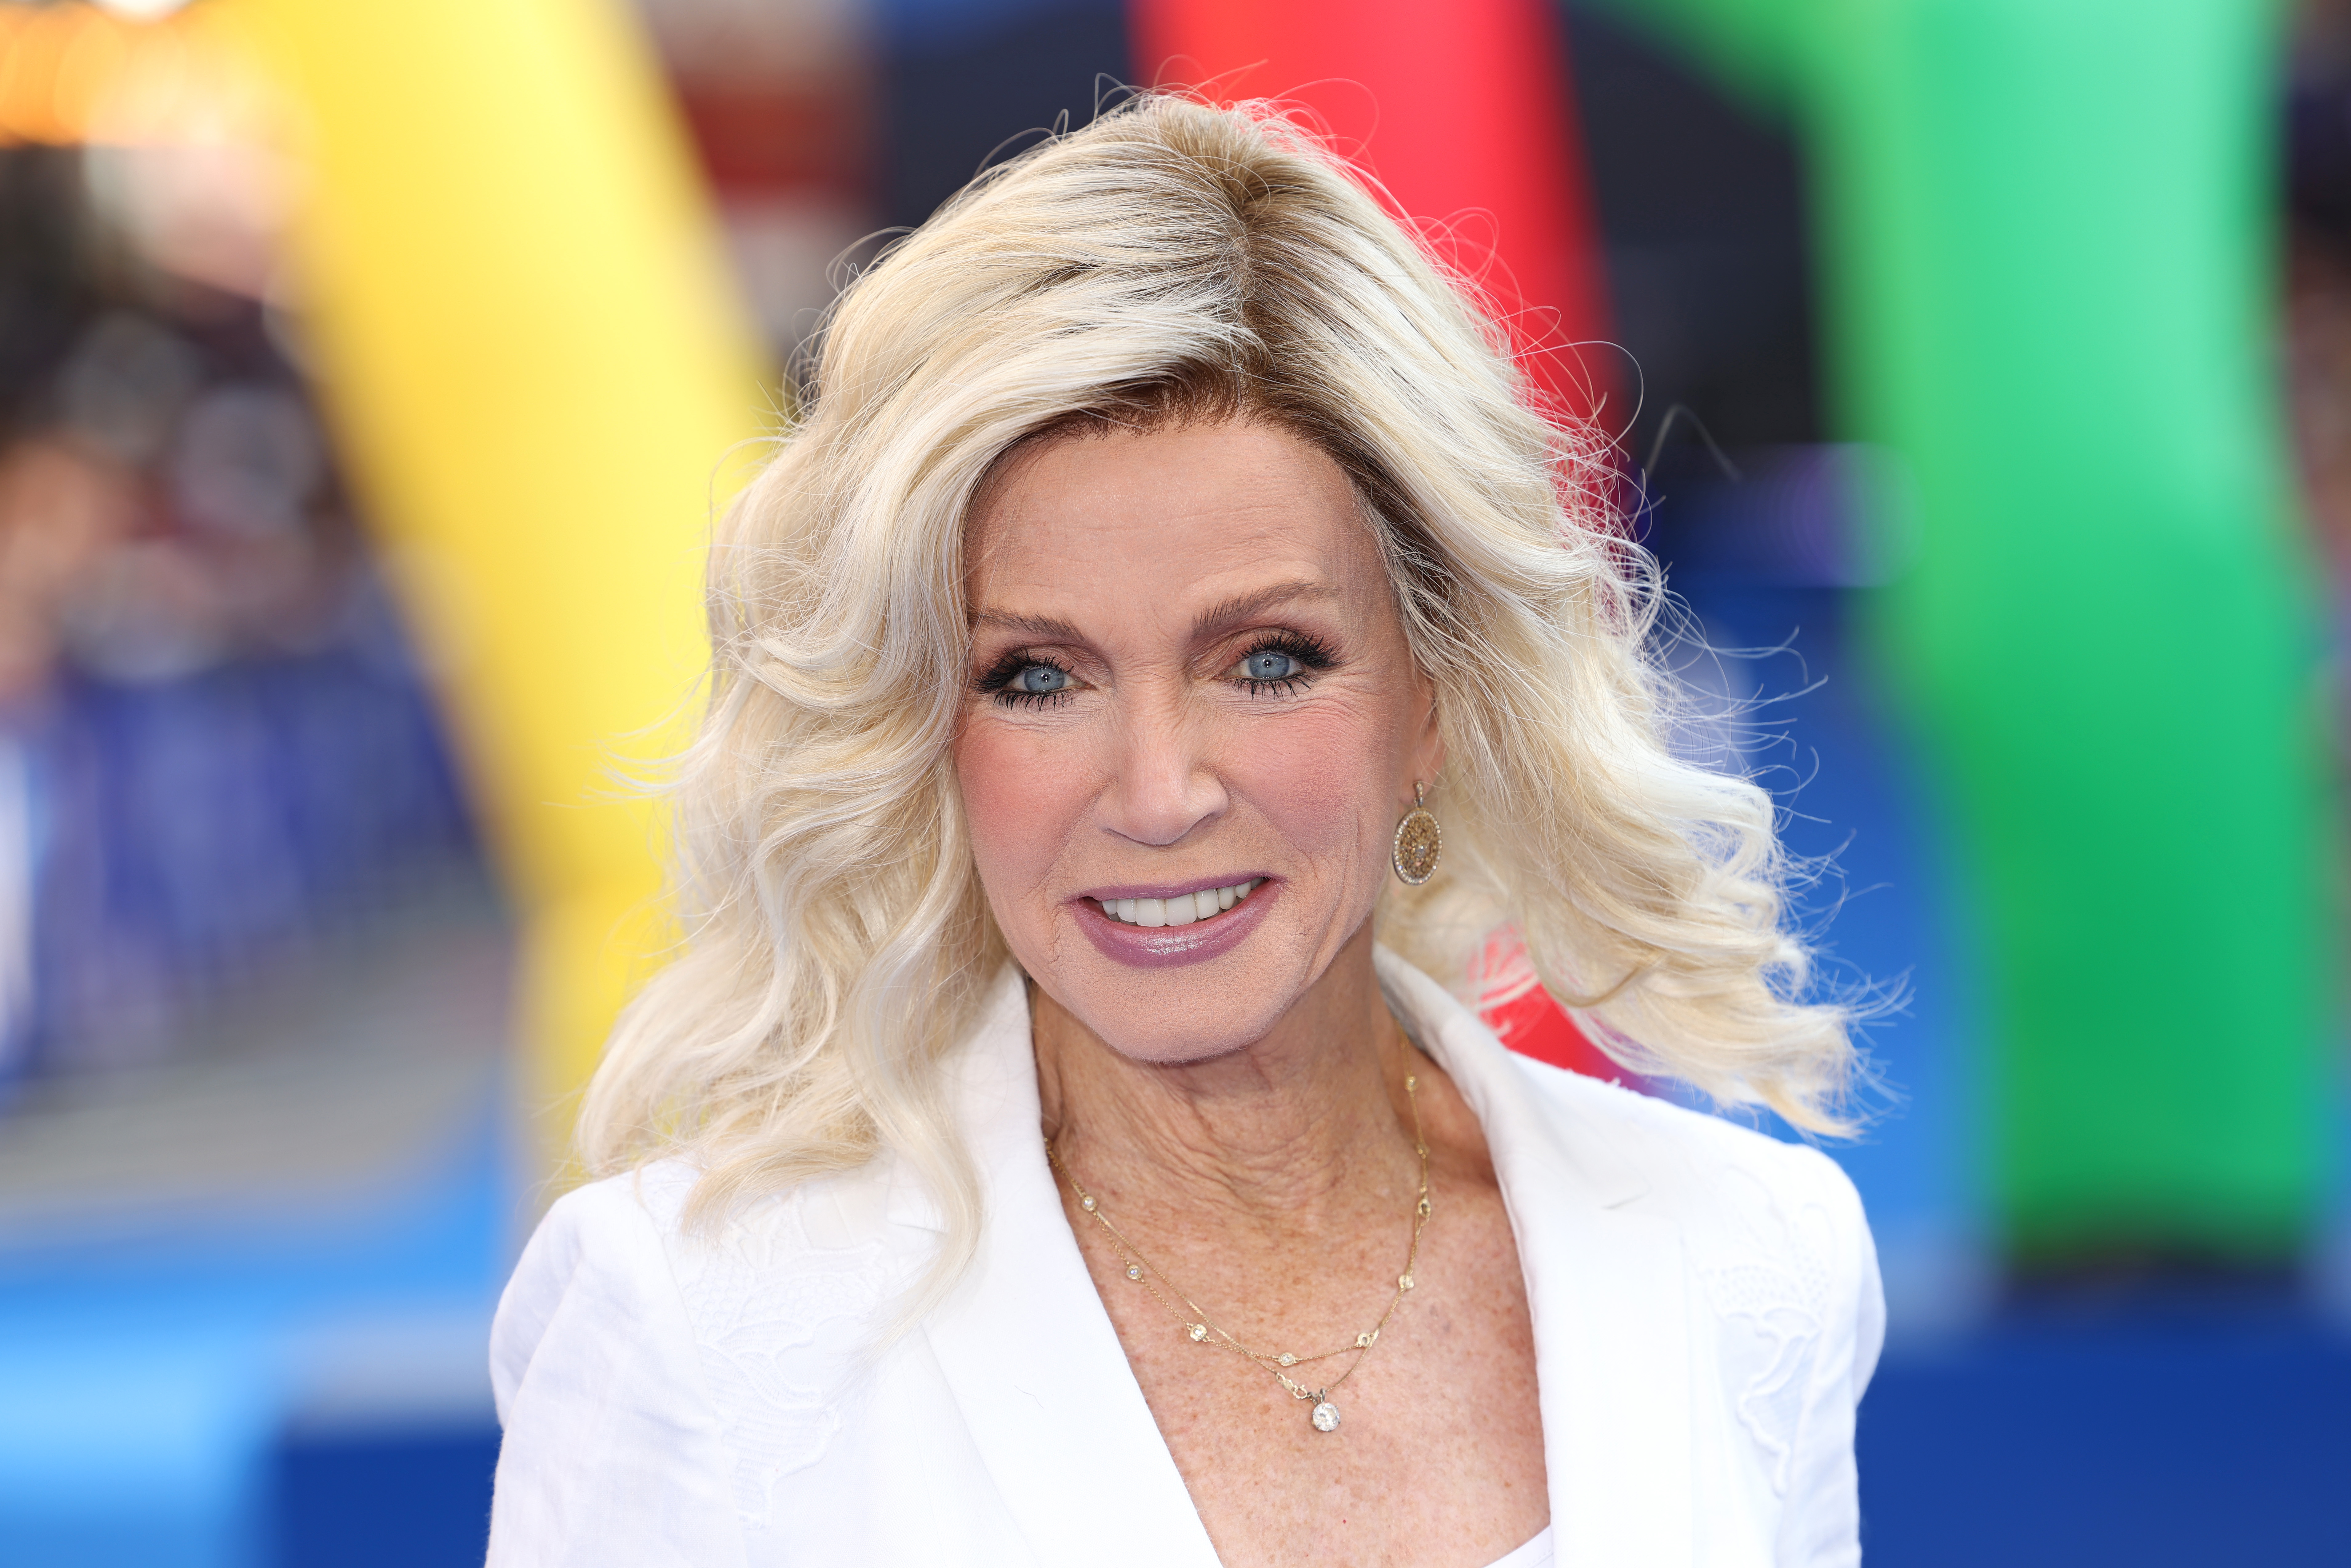 Donna Mills attends the UK premiere of "NOPE" at the Odeon Luxe Leicester Square on July 28, 2022 in London, England. | Source: Getty Images